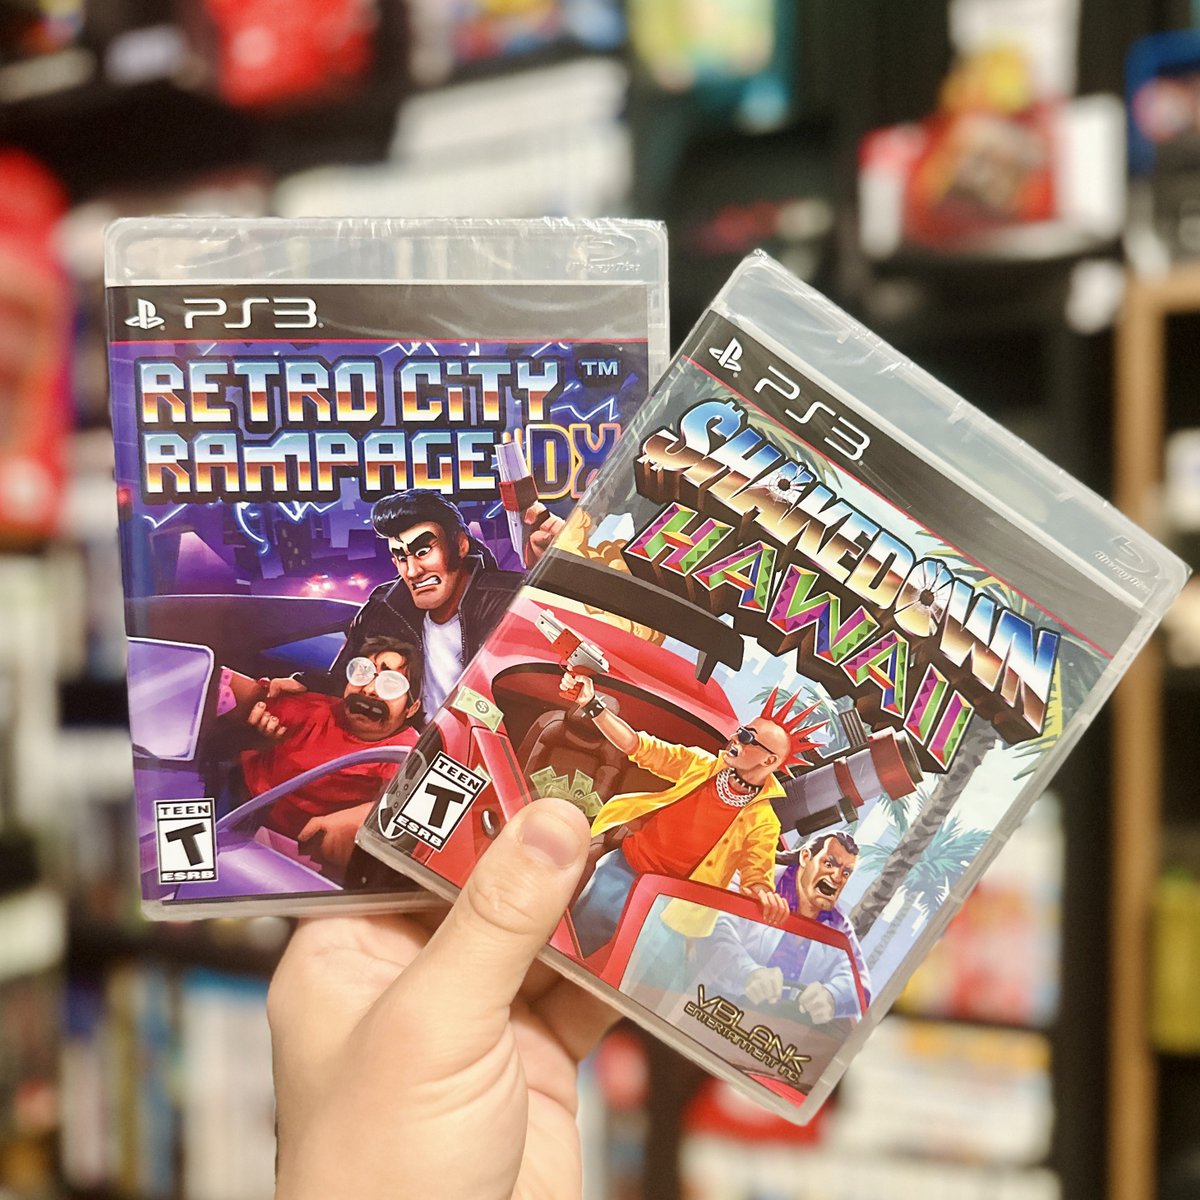 The final two PlayStation 3 releases from @RetroCR/@VblankGames. Super happy to have these, and continuing support for older video game systems. 

#themasters #gaming